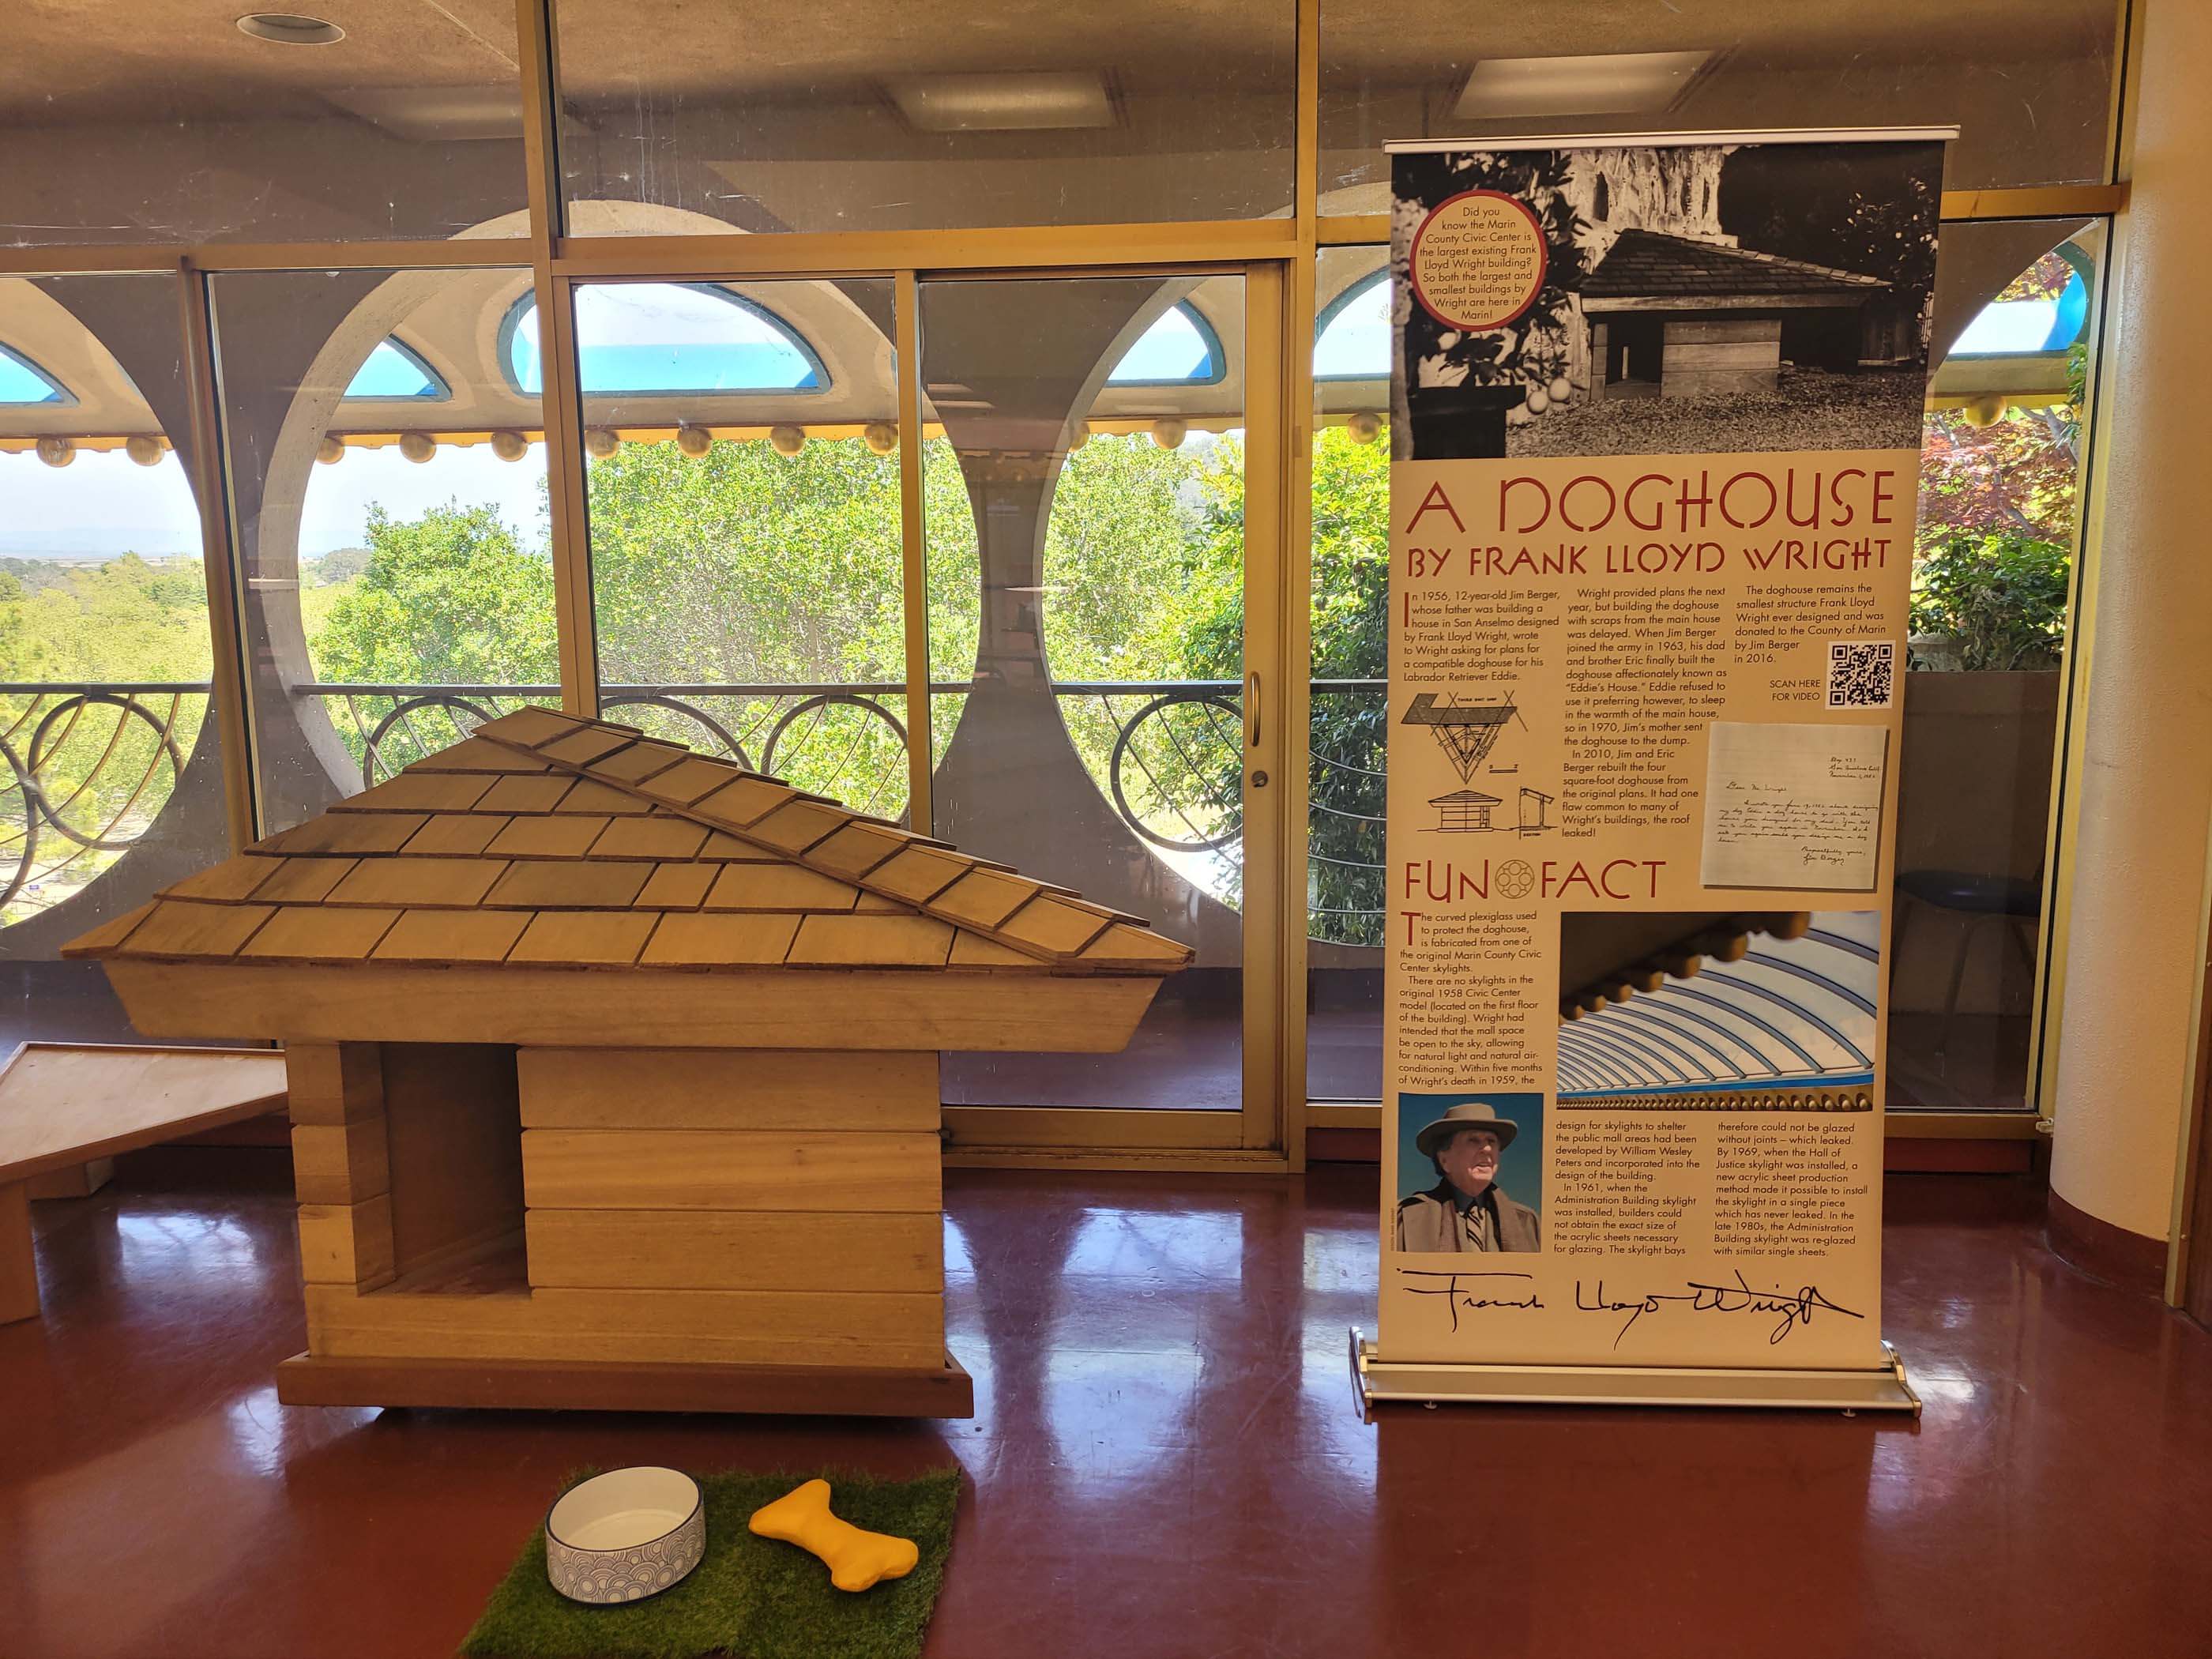 doghouse with angular roof and text on exhibition in Marin County Civic Center